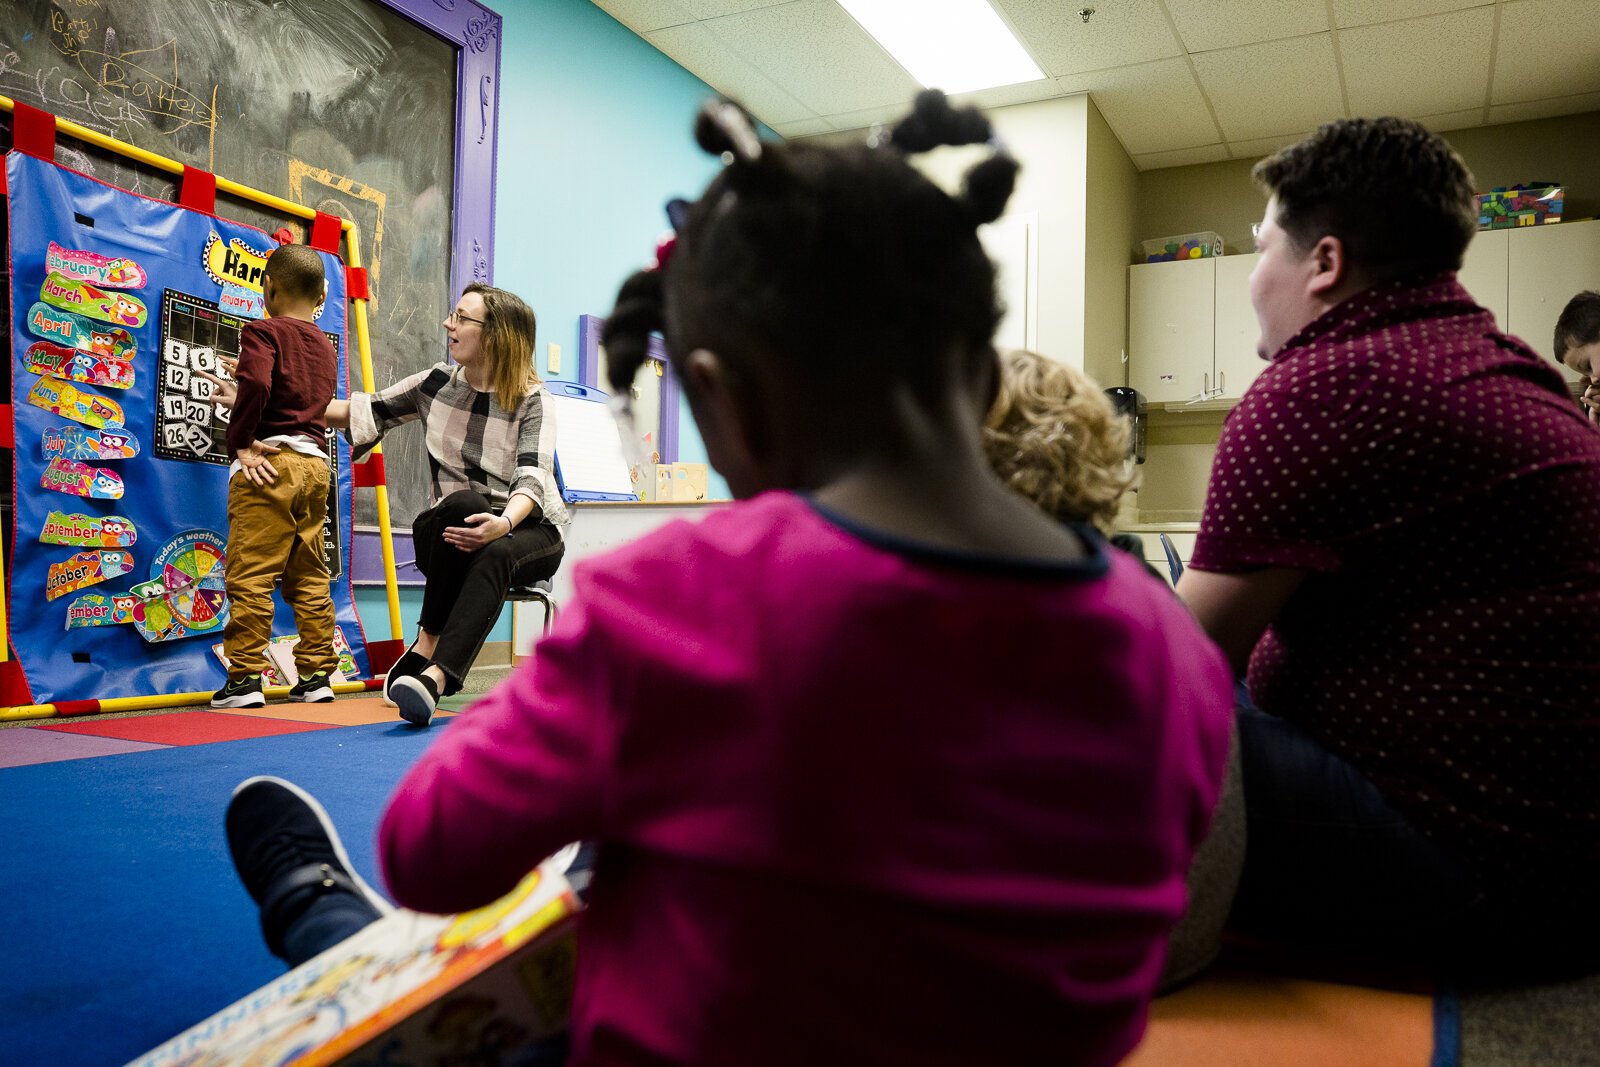 Michelle Pleasant leads her class in counting at the Harwood Center's Cordova location on January 27, 2020. Harwood serves children ages 18 months to six years who have been diagnosed with a developmental delay or disability. (Ziggy Mack)